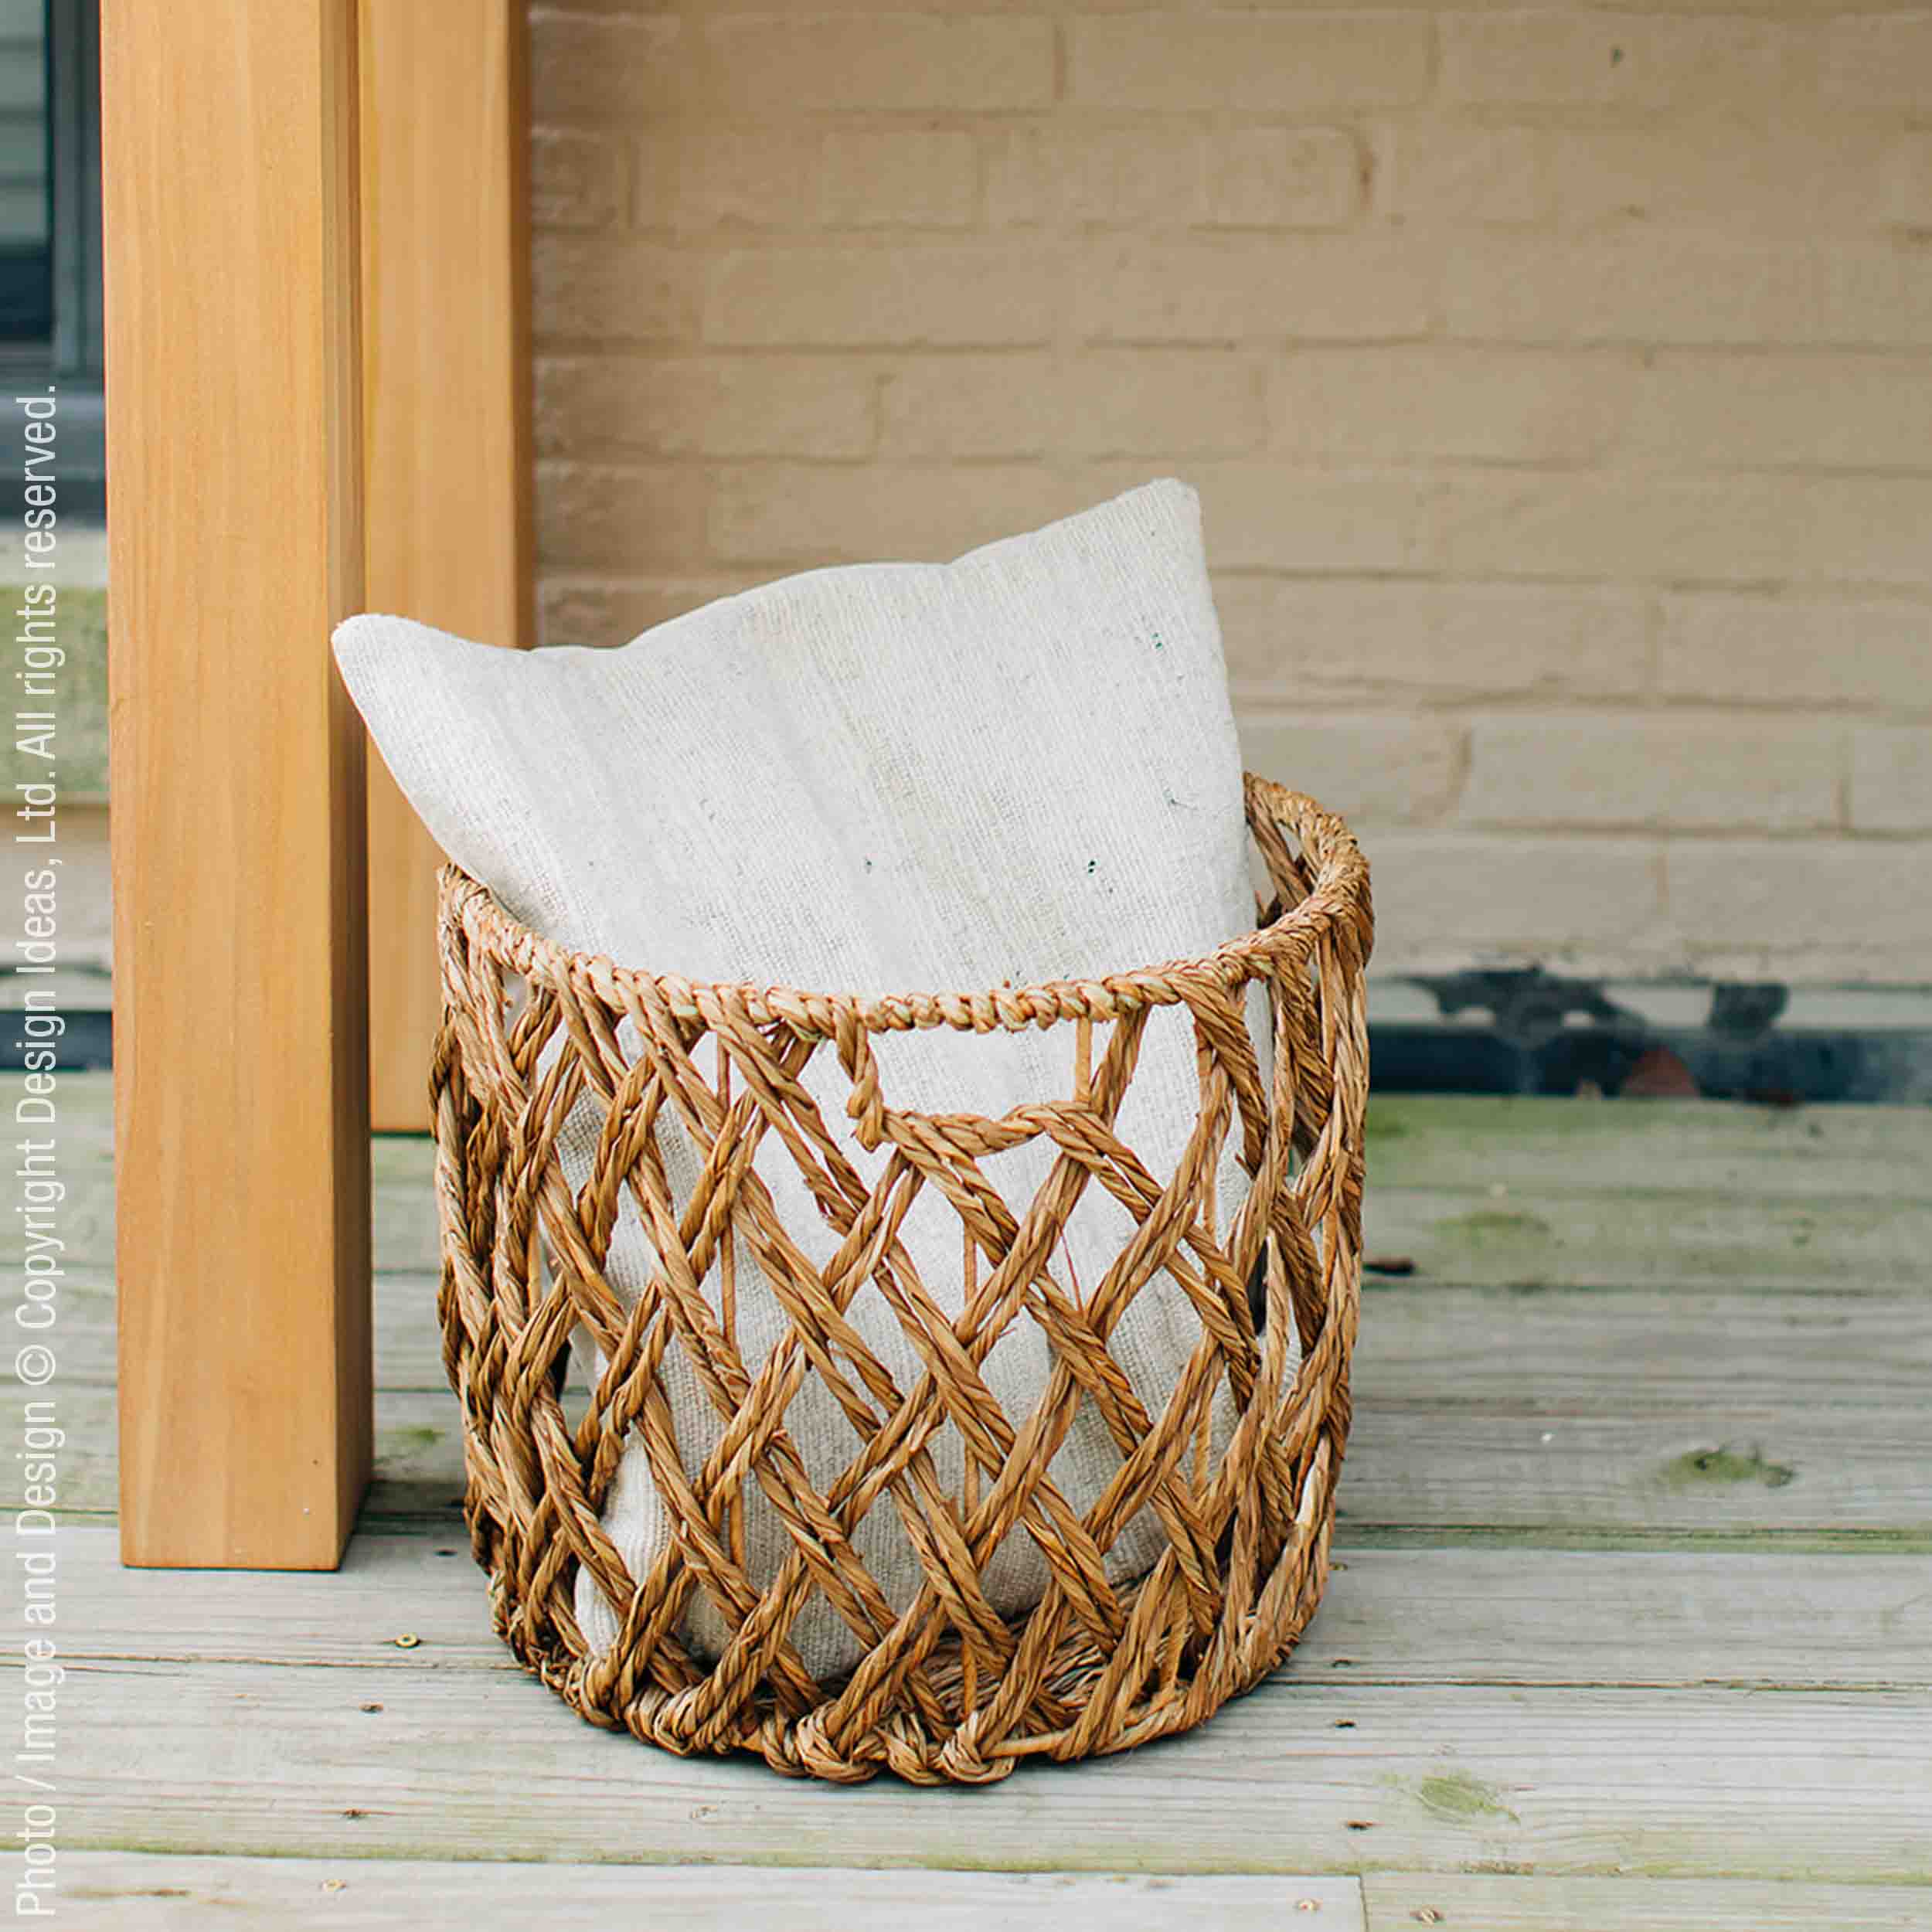 Vasate™ baskets - Natural | Image 2 | Premium Basket from the Vasate collection | made with Water Hyacinth Twine for long lasting use | texxture